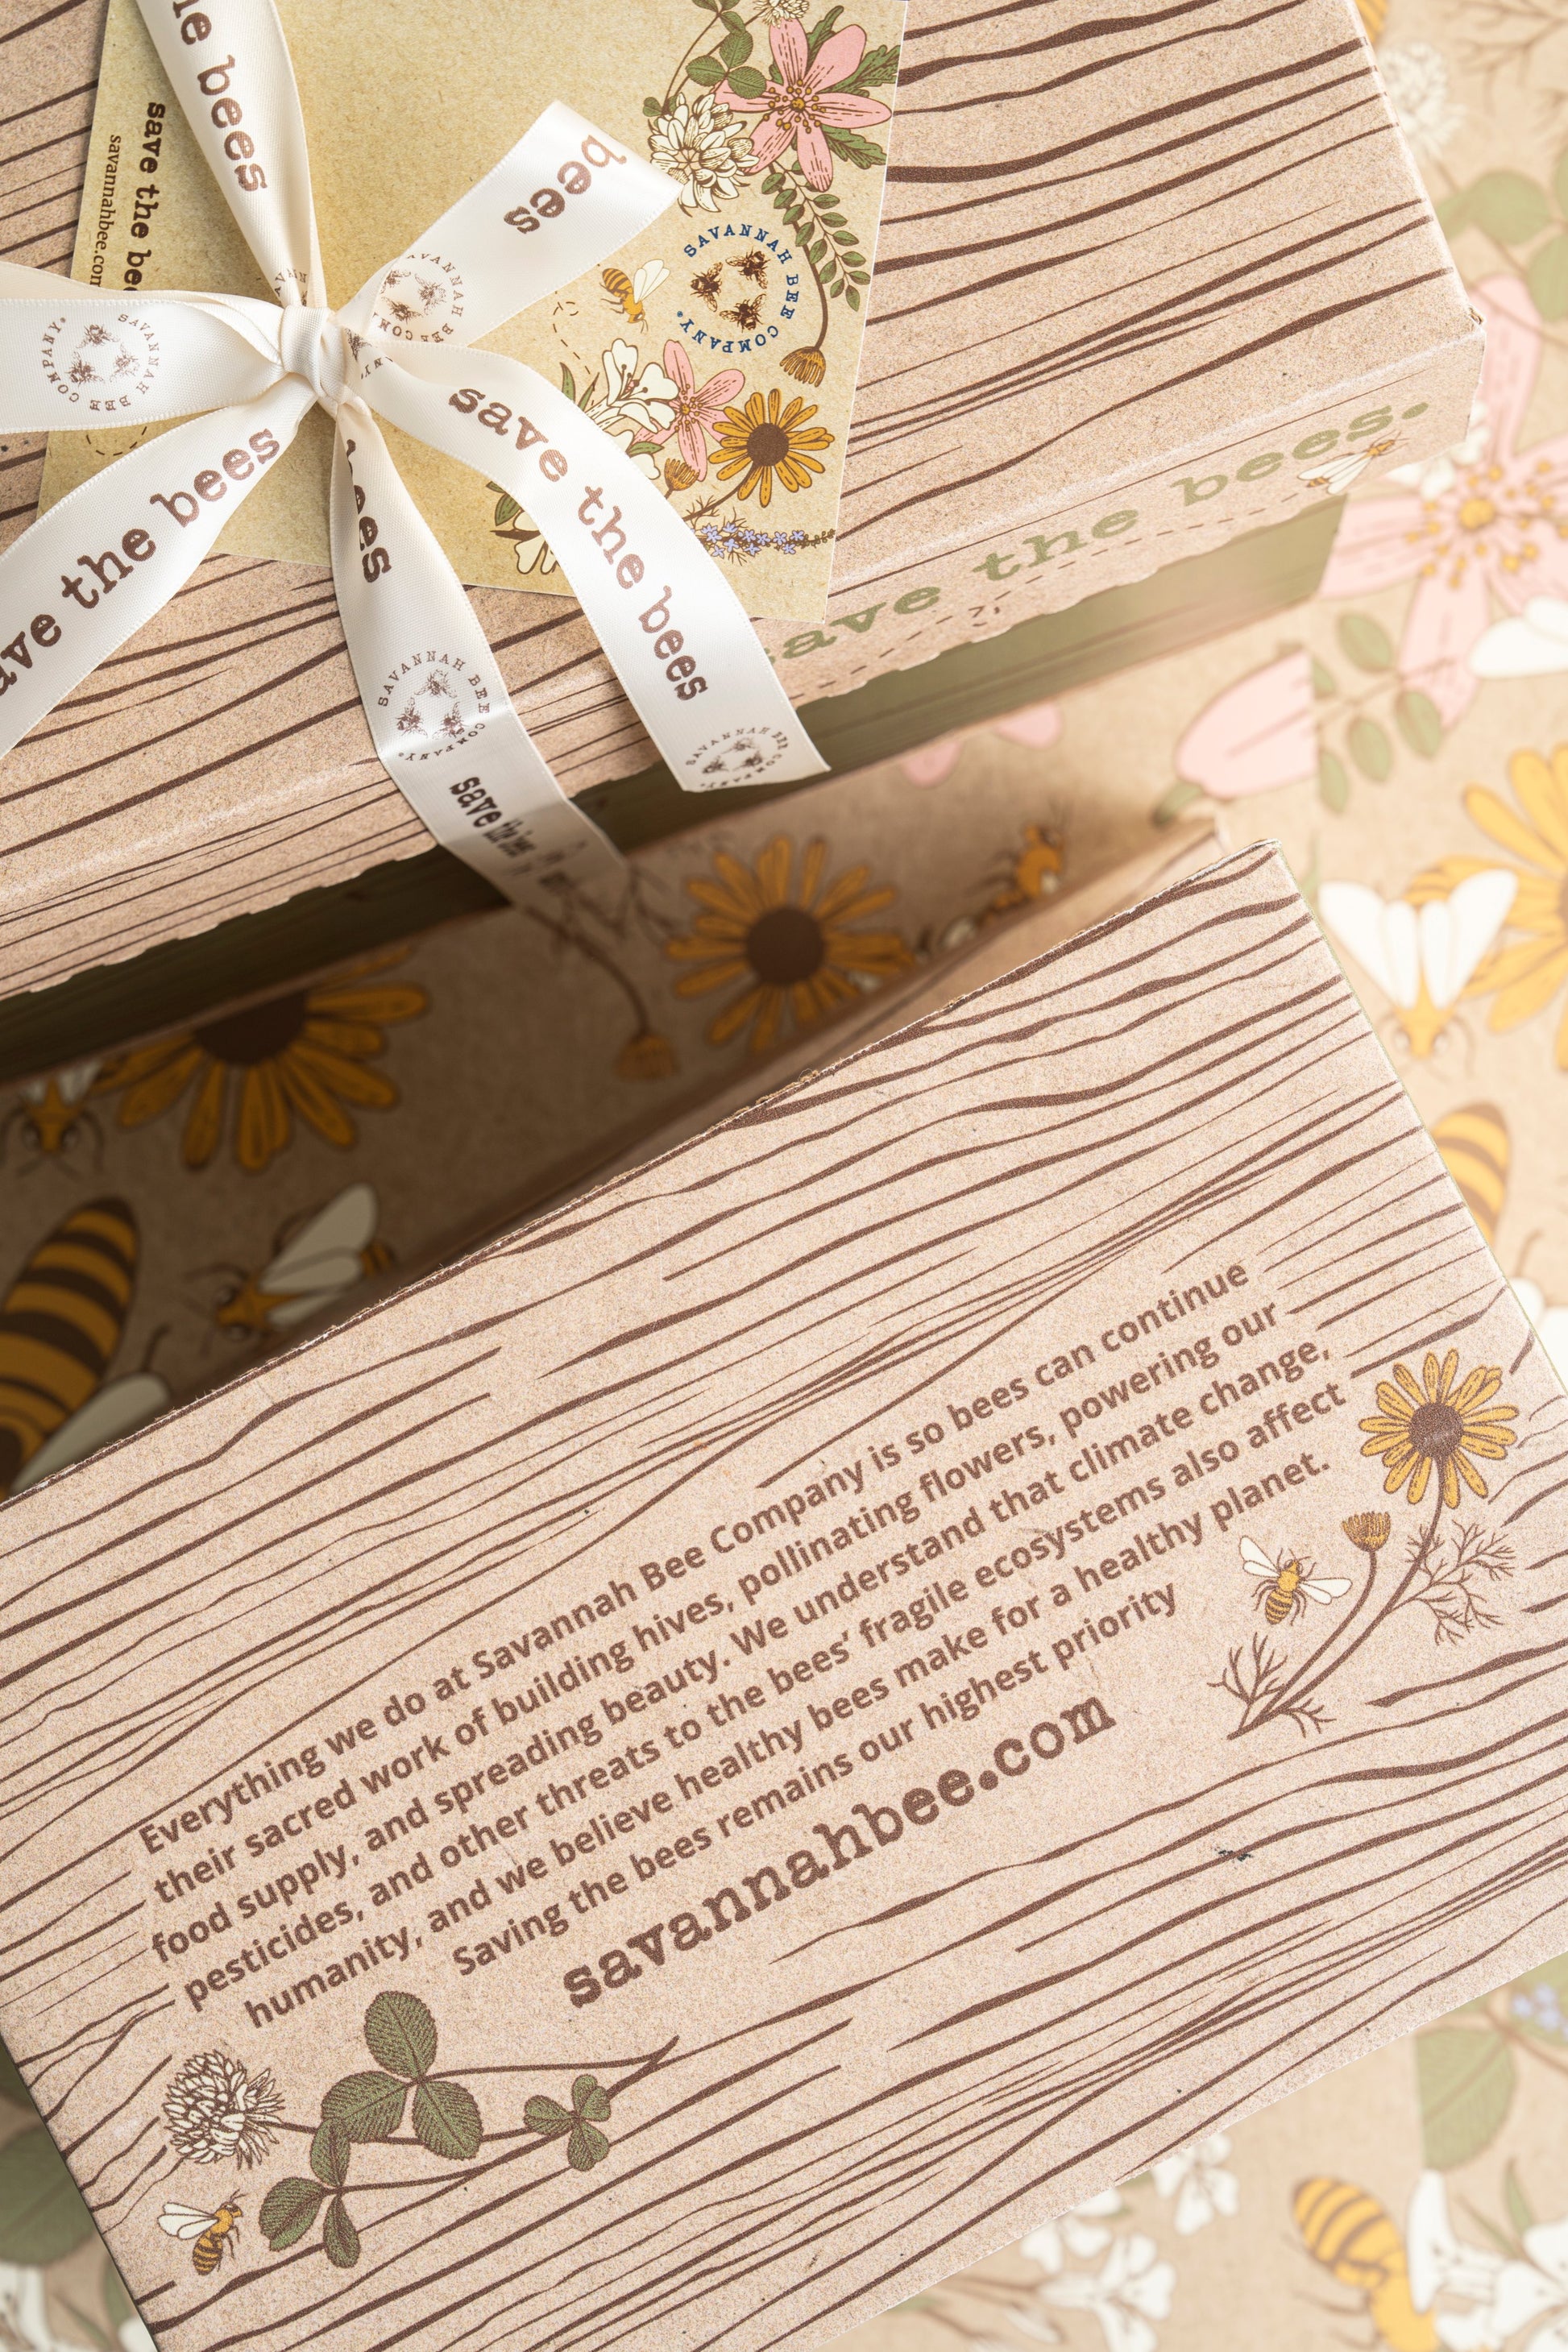 Save the bees box bottom with a quote and the Savannah Bee Company website